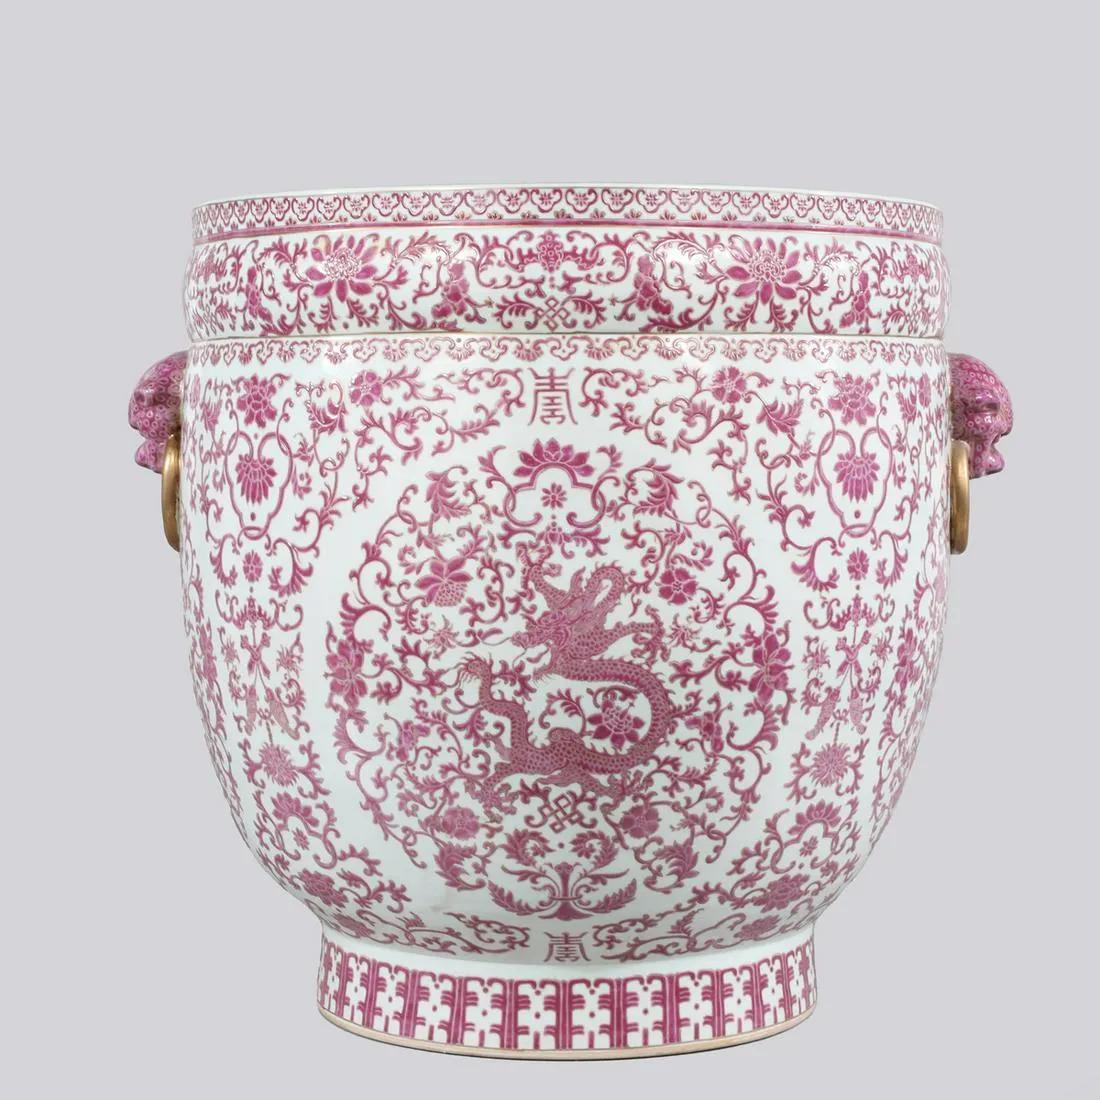 A Massive Pair of Chinese Pink and White Dragon Porcelain Planters, Republic Period.

Elevate your living space with a touch of timeless elegance with this exquisite pair of massive Chinese porcelain planters. Imbued with rich cultural symbolism and